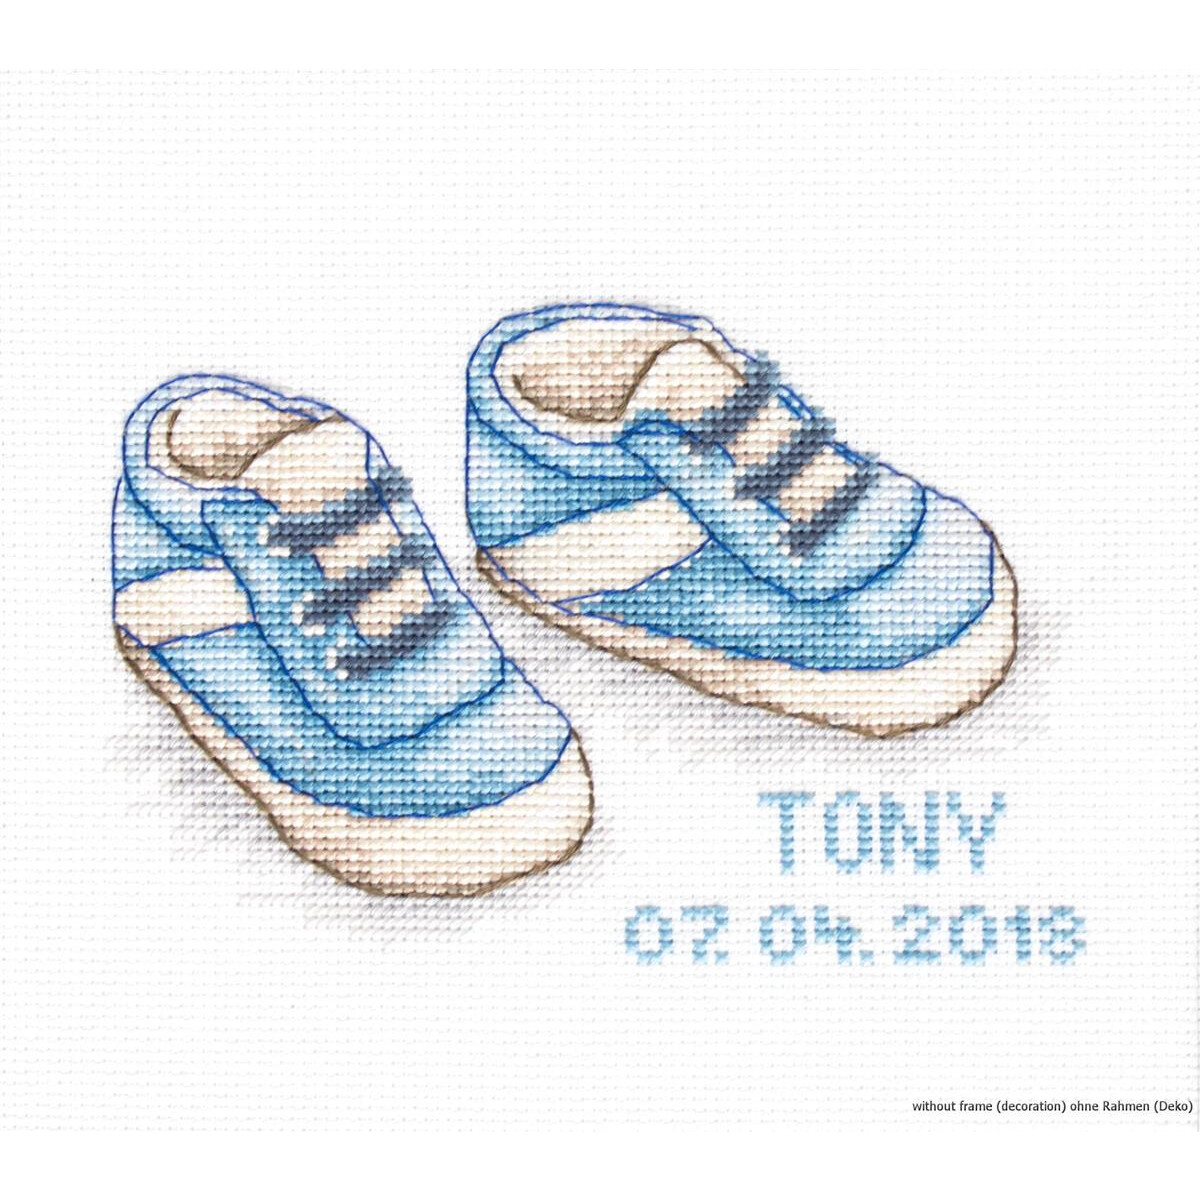 cross shoes for baby